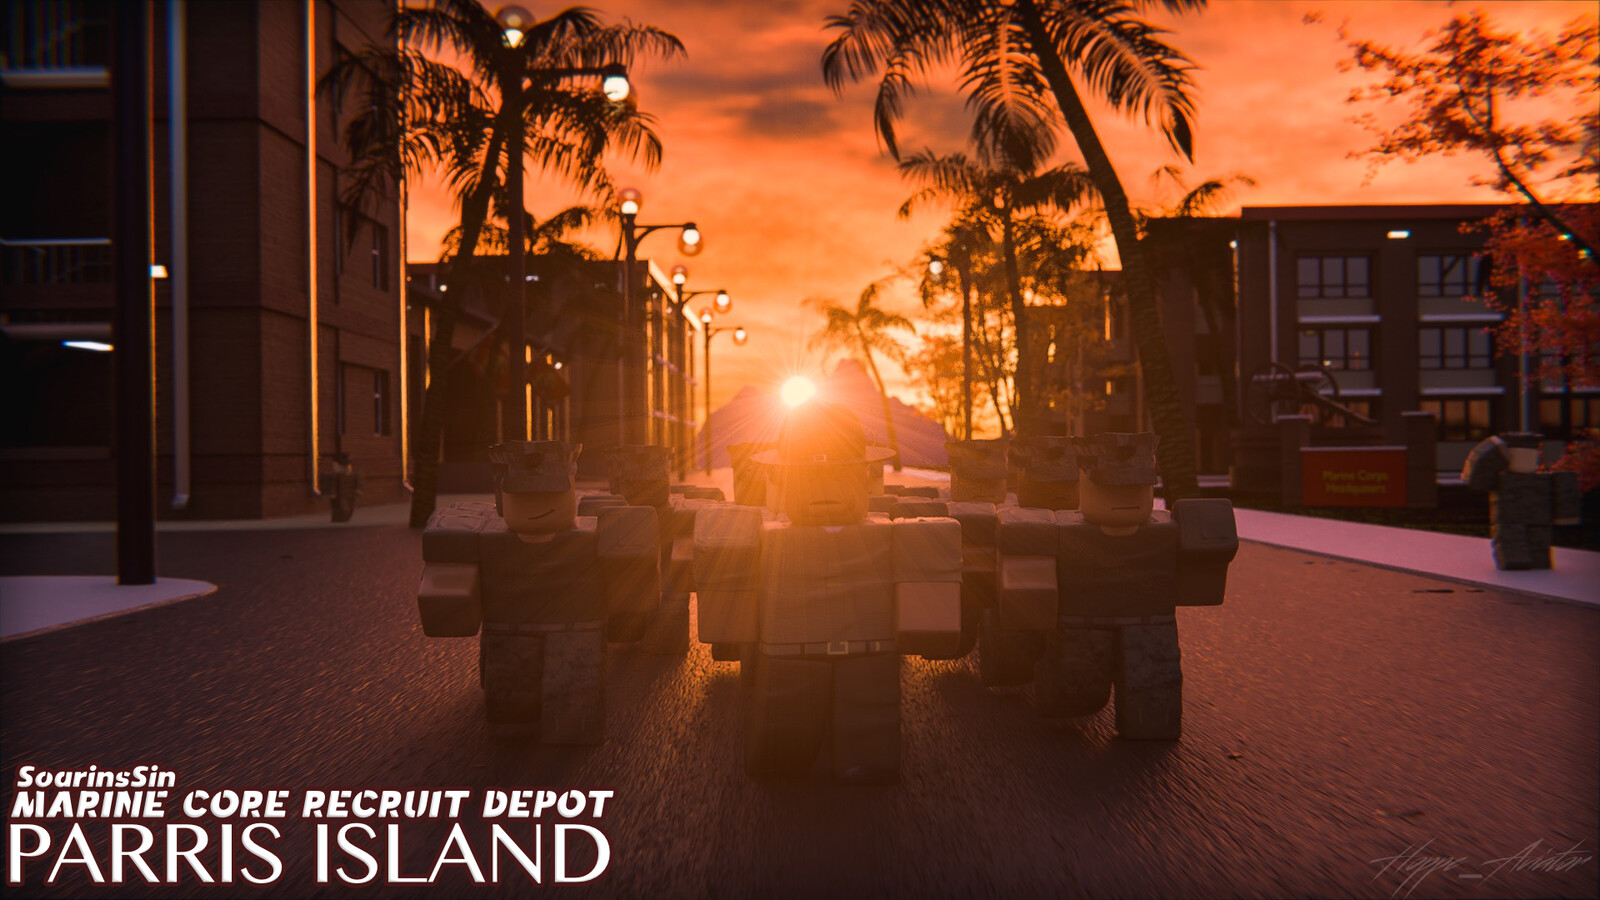 Gfx Pictures Roblox Sunset